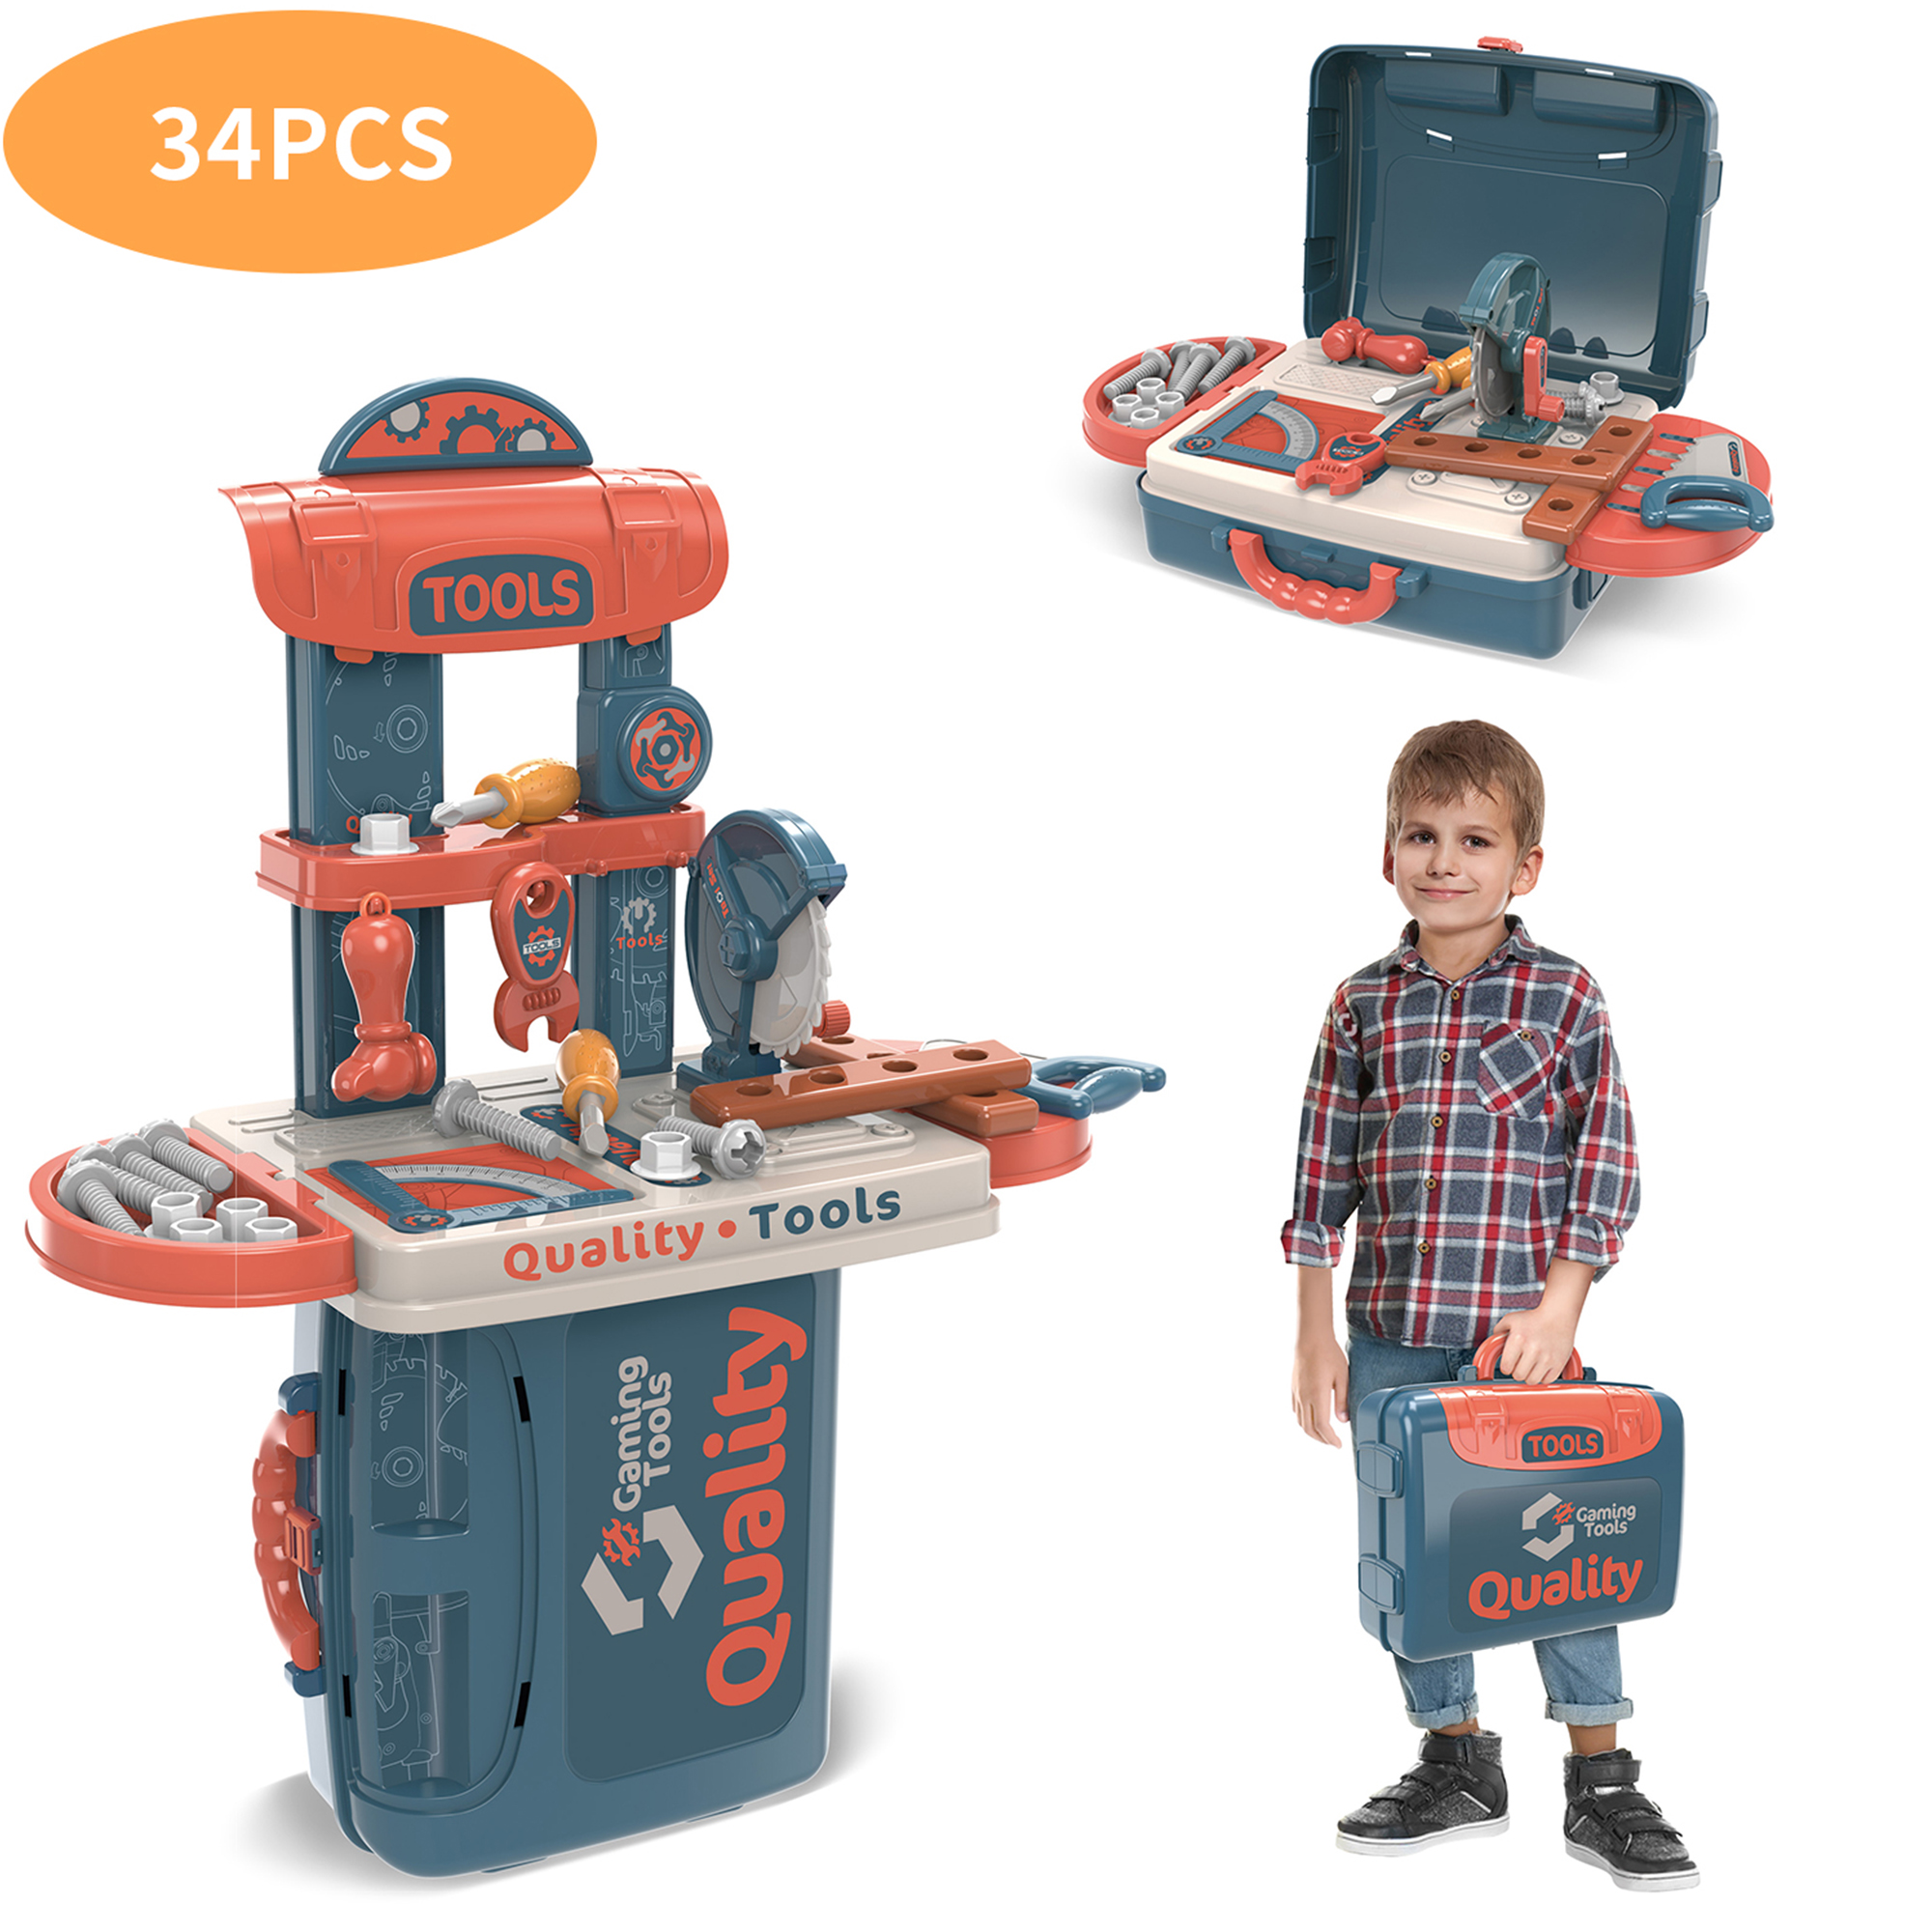 Kids Tool Set - 34 PCS Pretend Play Toolbox Toy Set for Toddler, Kids Tool Workbench Toys Construction Tool Kit Playset Accessories Gift for Girls Boys Ages 3 4 5 6 7 8 Years Old - image 1 of 9